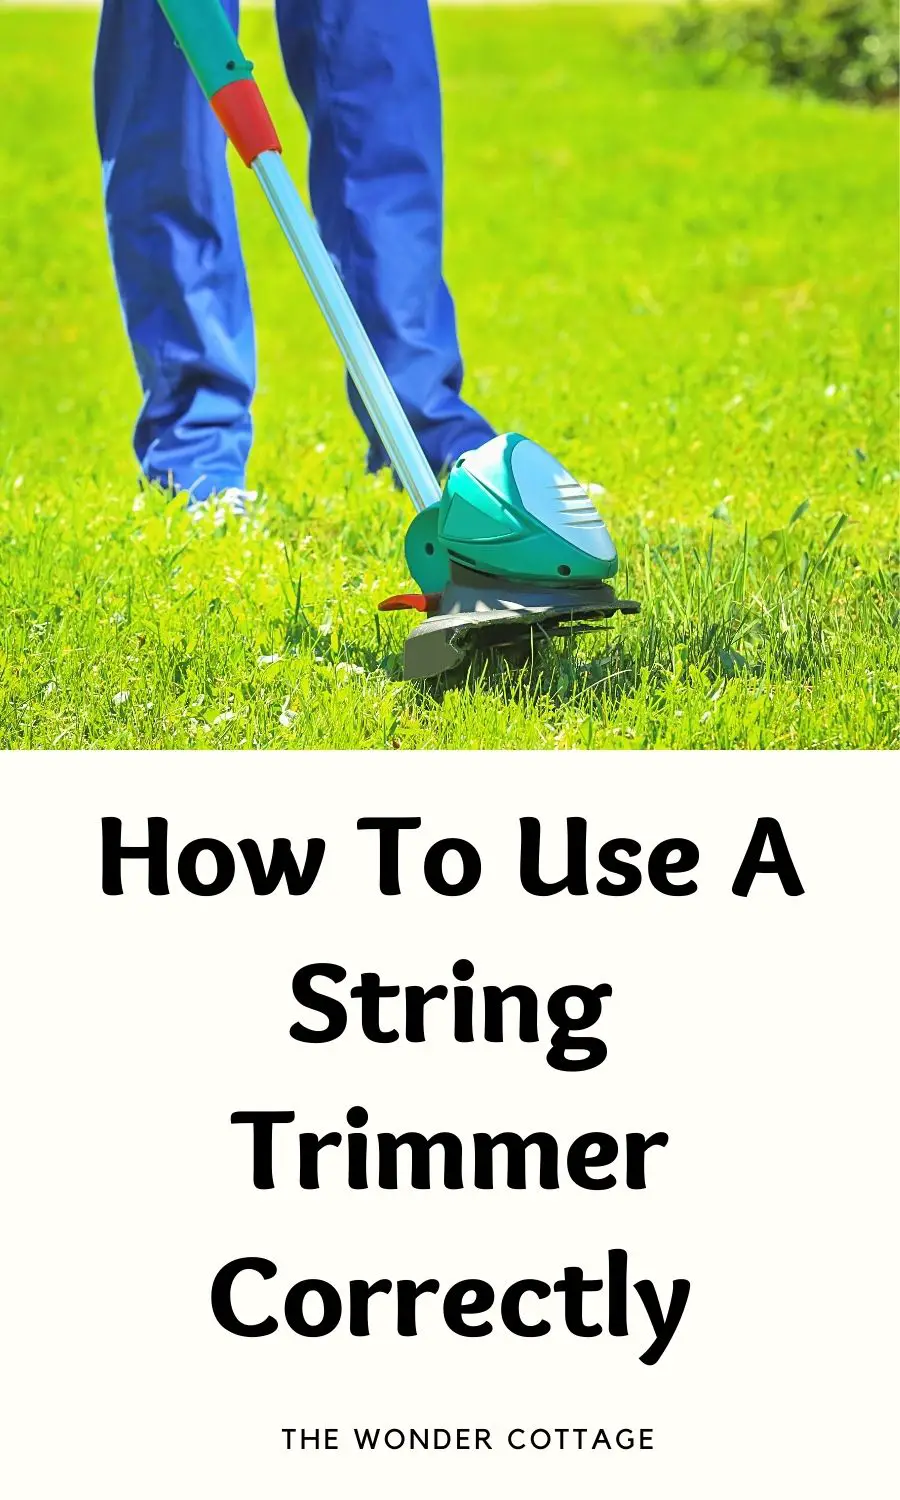 How To Use A String Trimmer Correctly